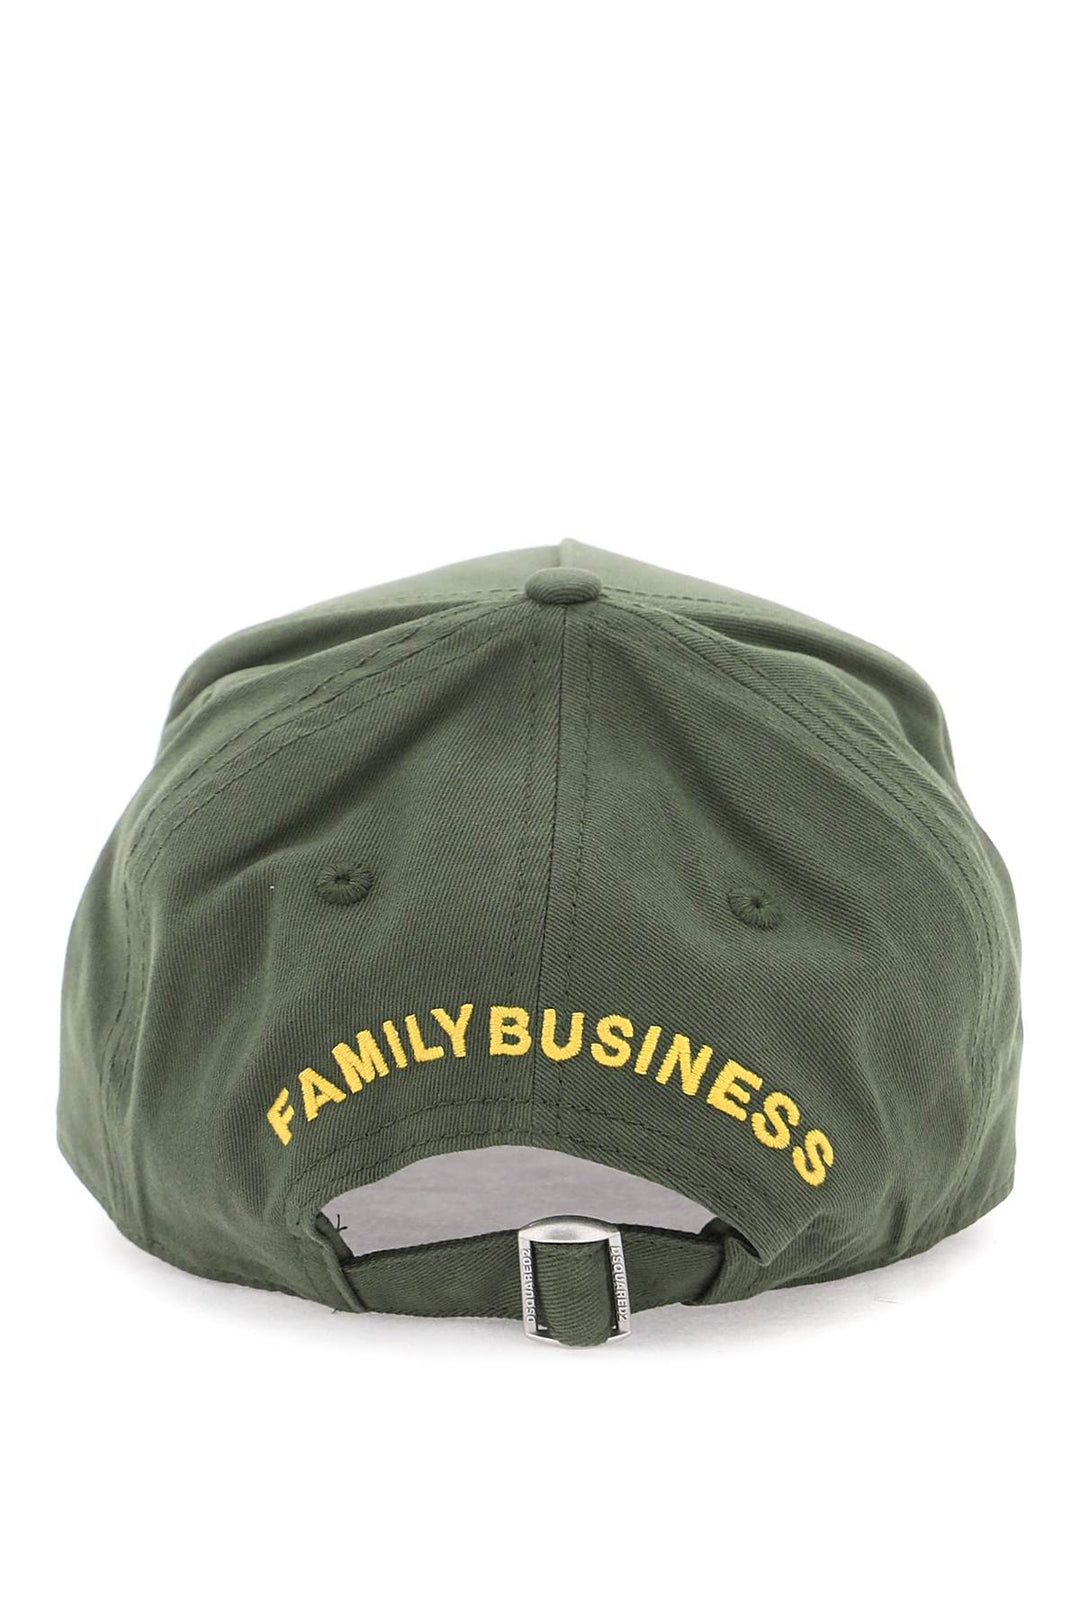 Dsquared2 Baseball Cap With Logoed Patch   Khaki